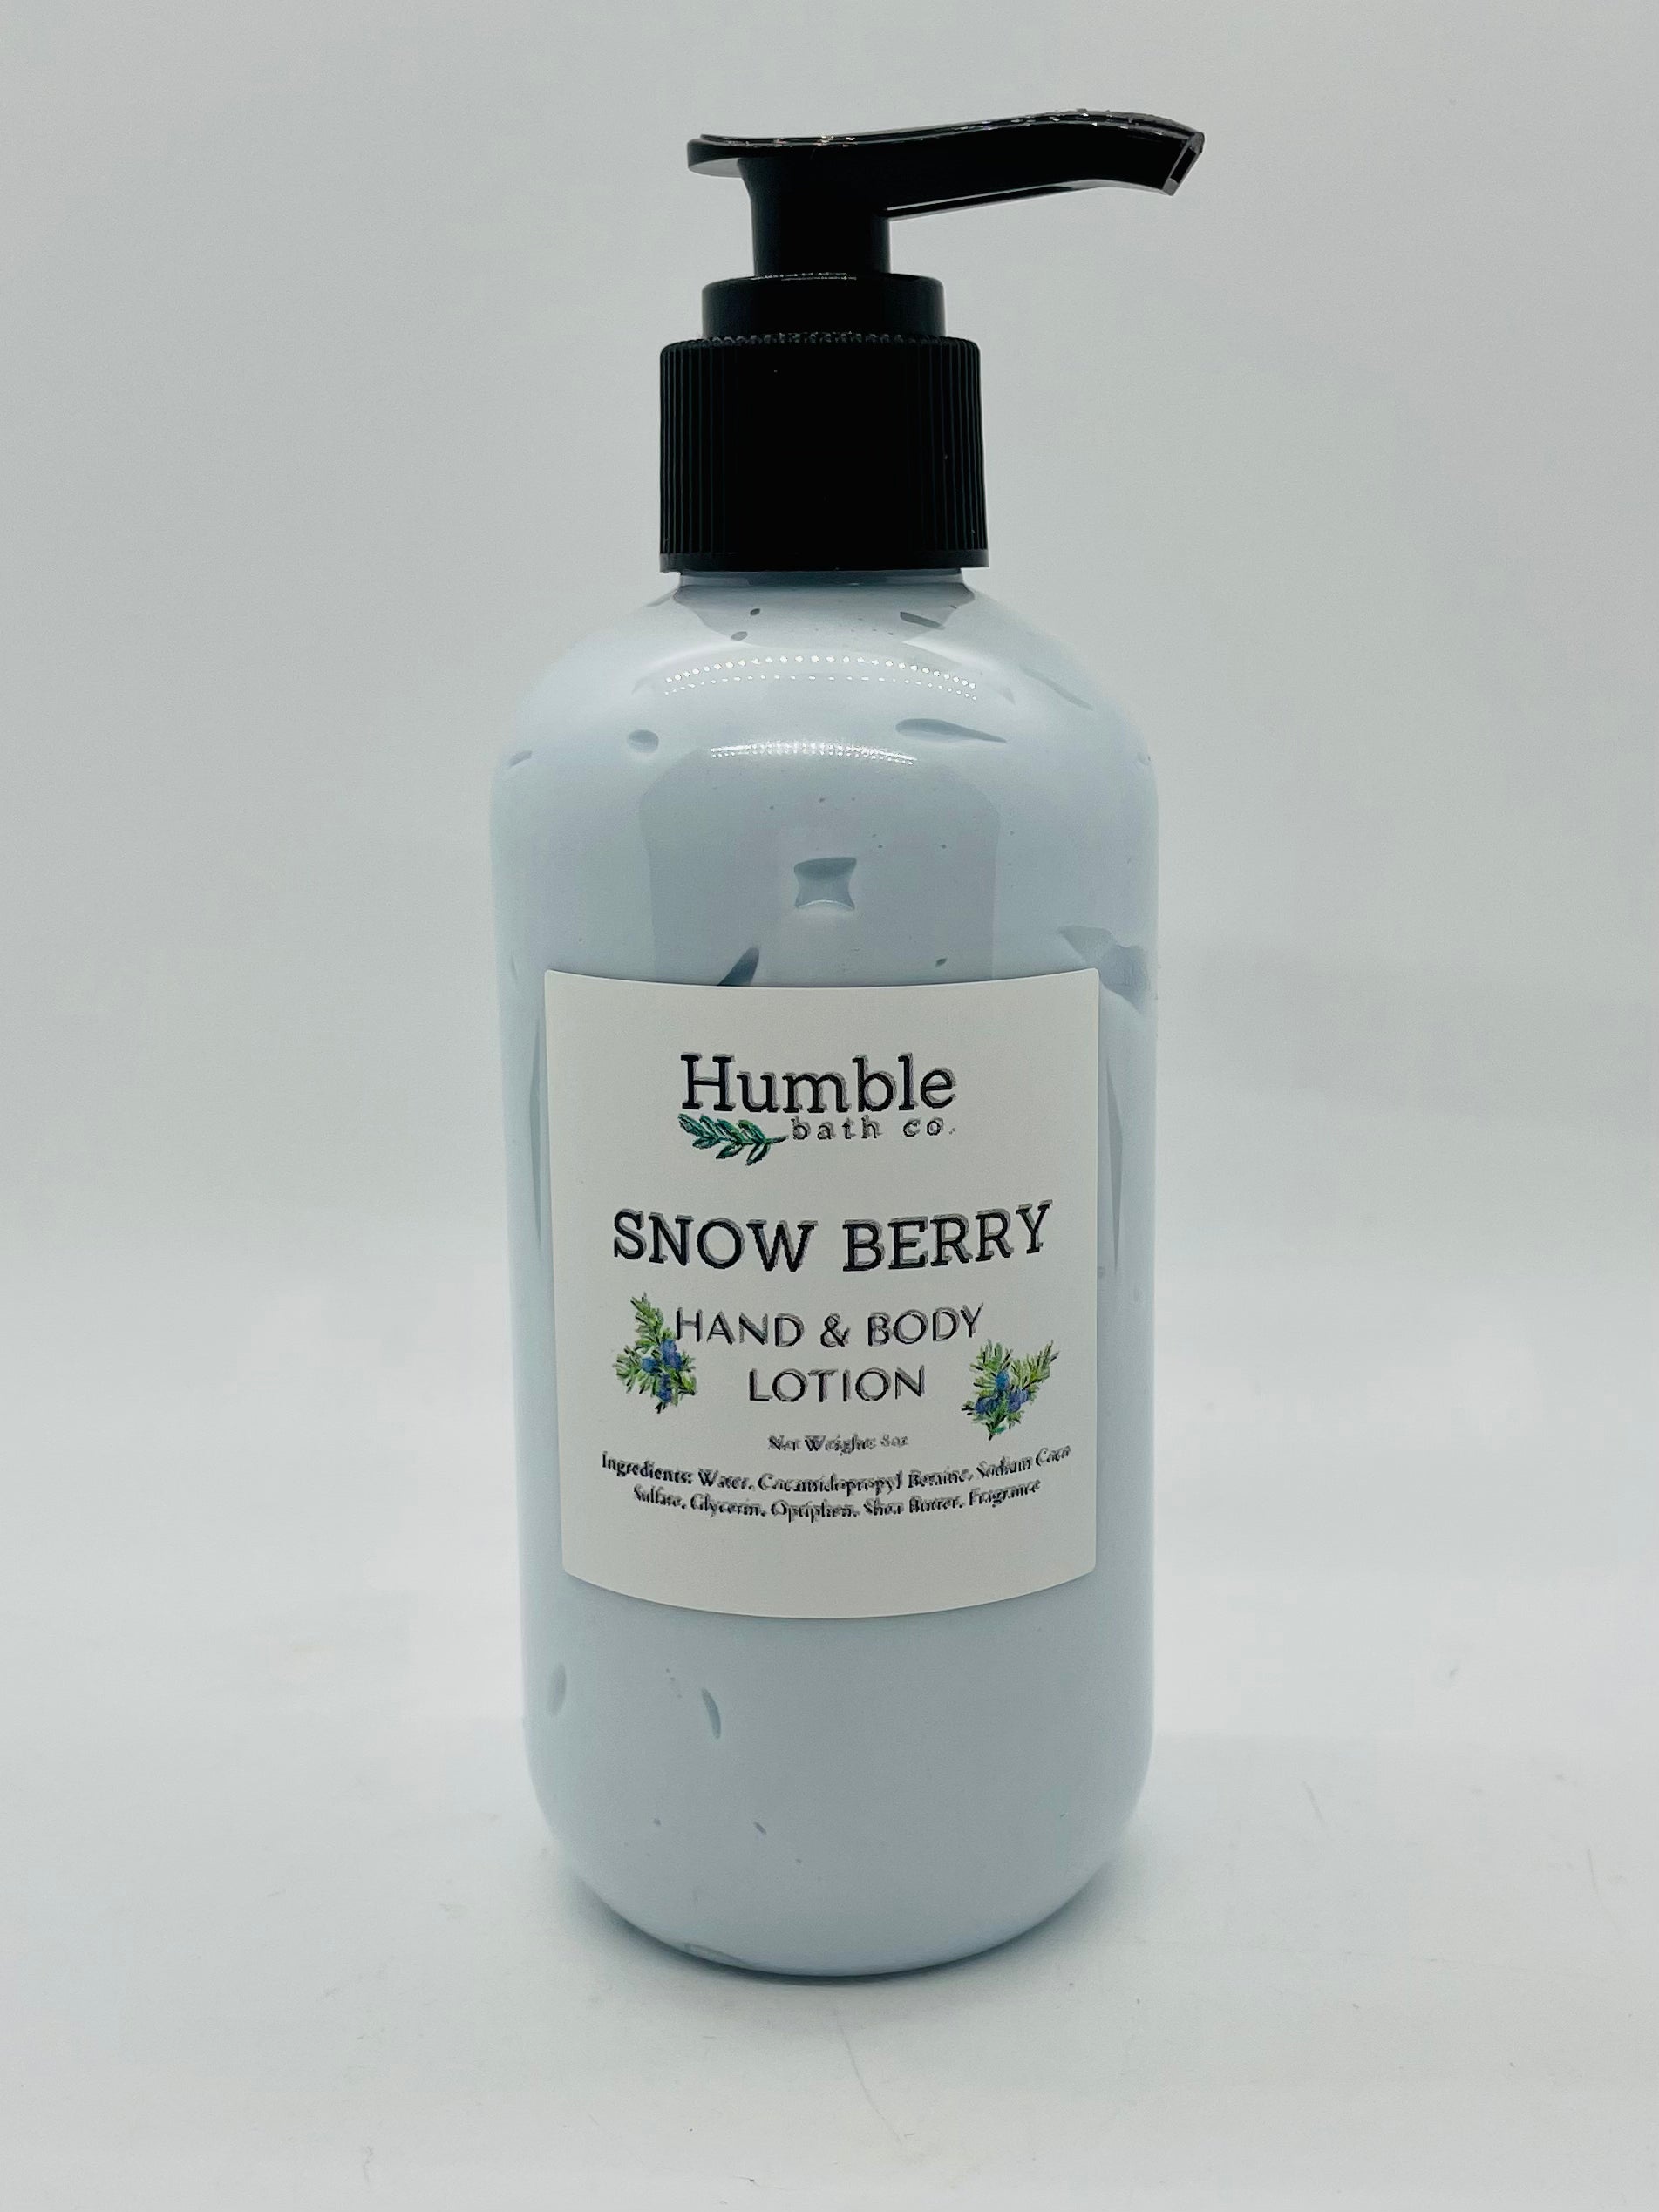 Snow Berry Hand & Body Lotion